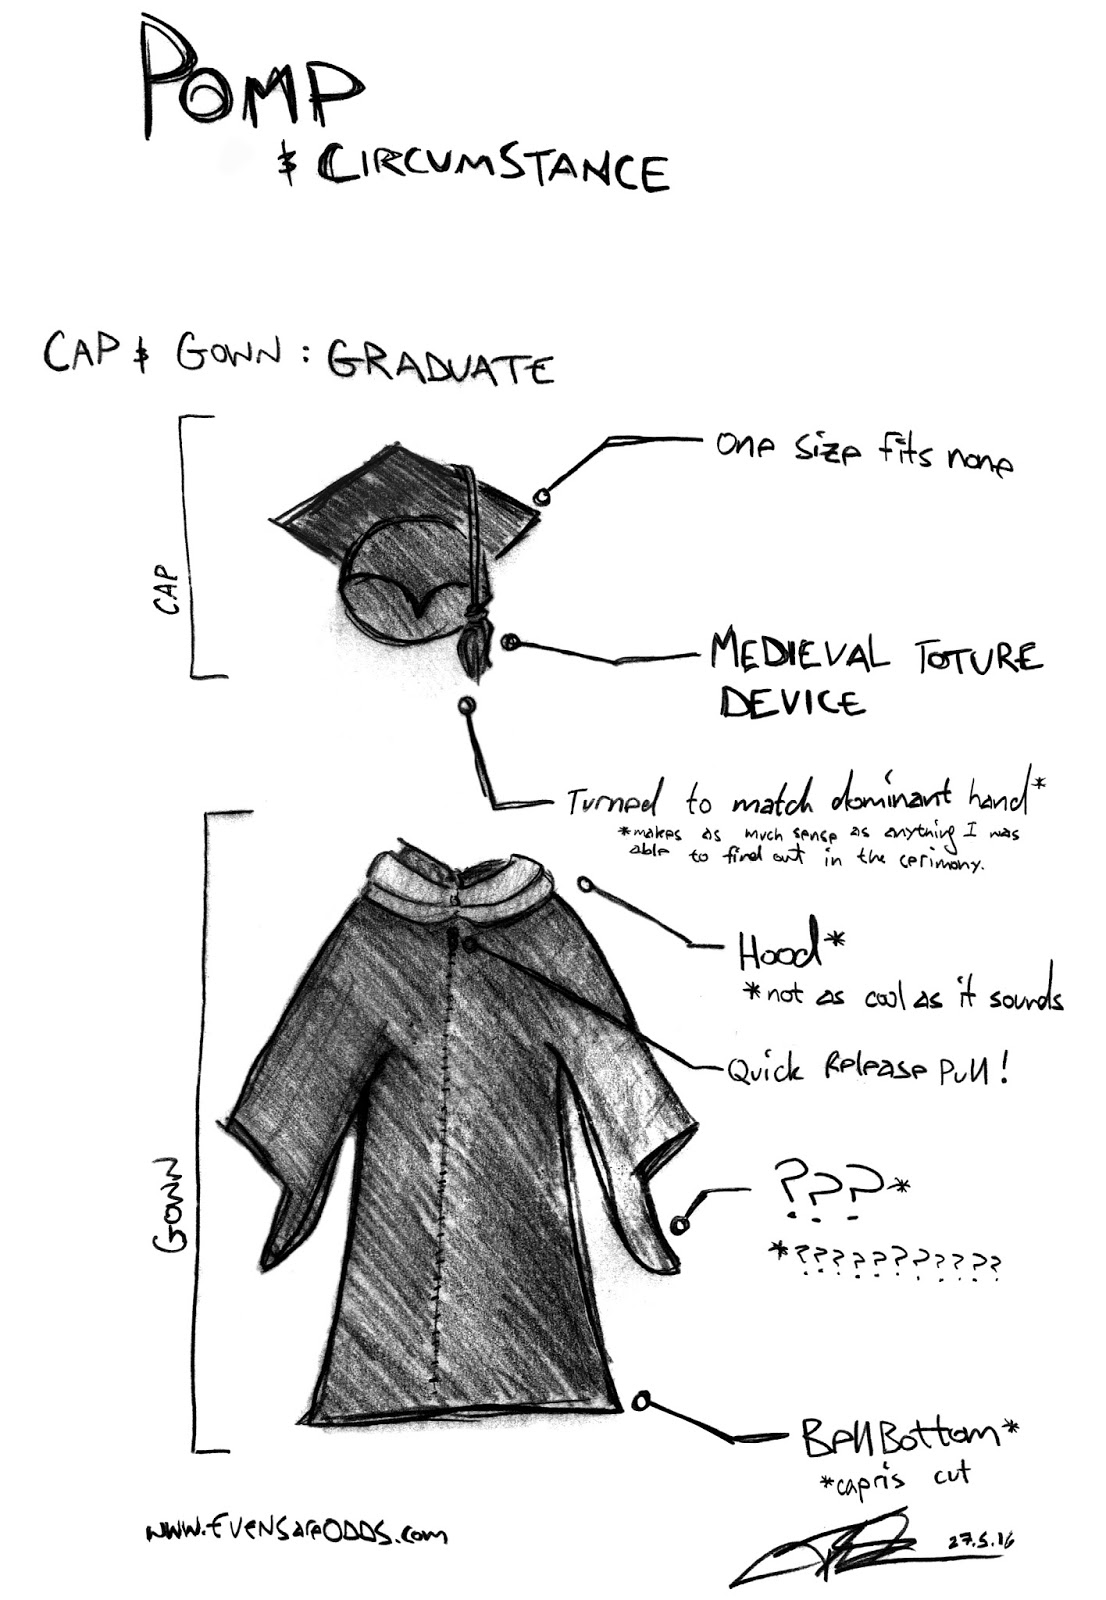 *Labeled Photos* Cap: "One size fits none" ~ Tassel: "Medieval toture device" "Turned to match dominant hand *makes as much sense as anything I was able to find out in the ceremony." ~ "Hood *not as cool as it sounds" ~ Zipper: "Quick release pull!" ~ Sleeve 'crescents': "??? *???????????"  ~ Hem: "Bell bottom  *capris cut"